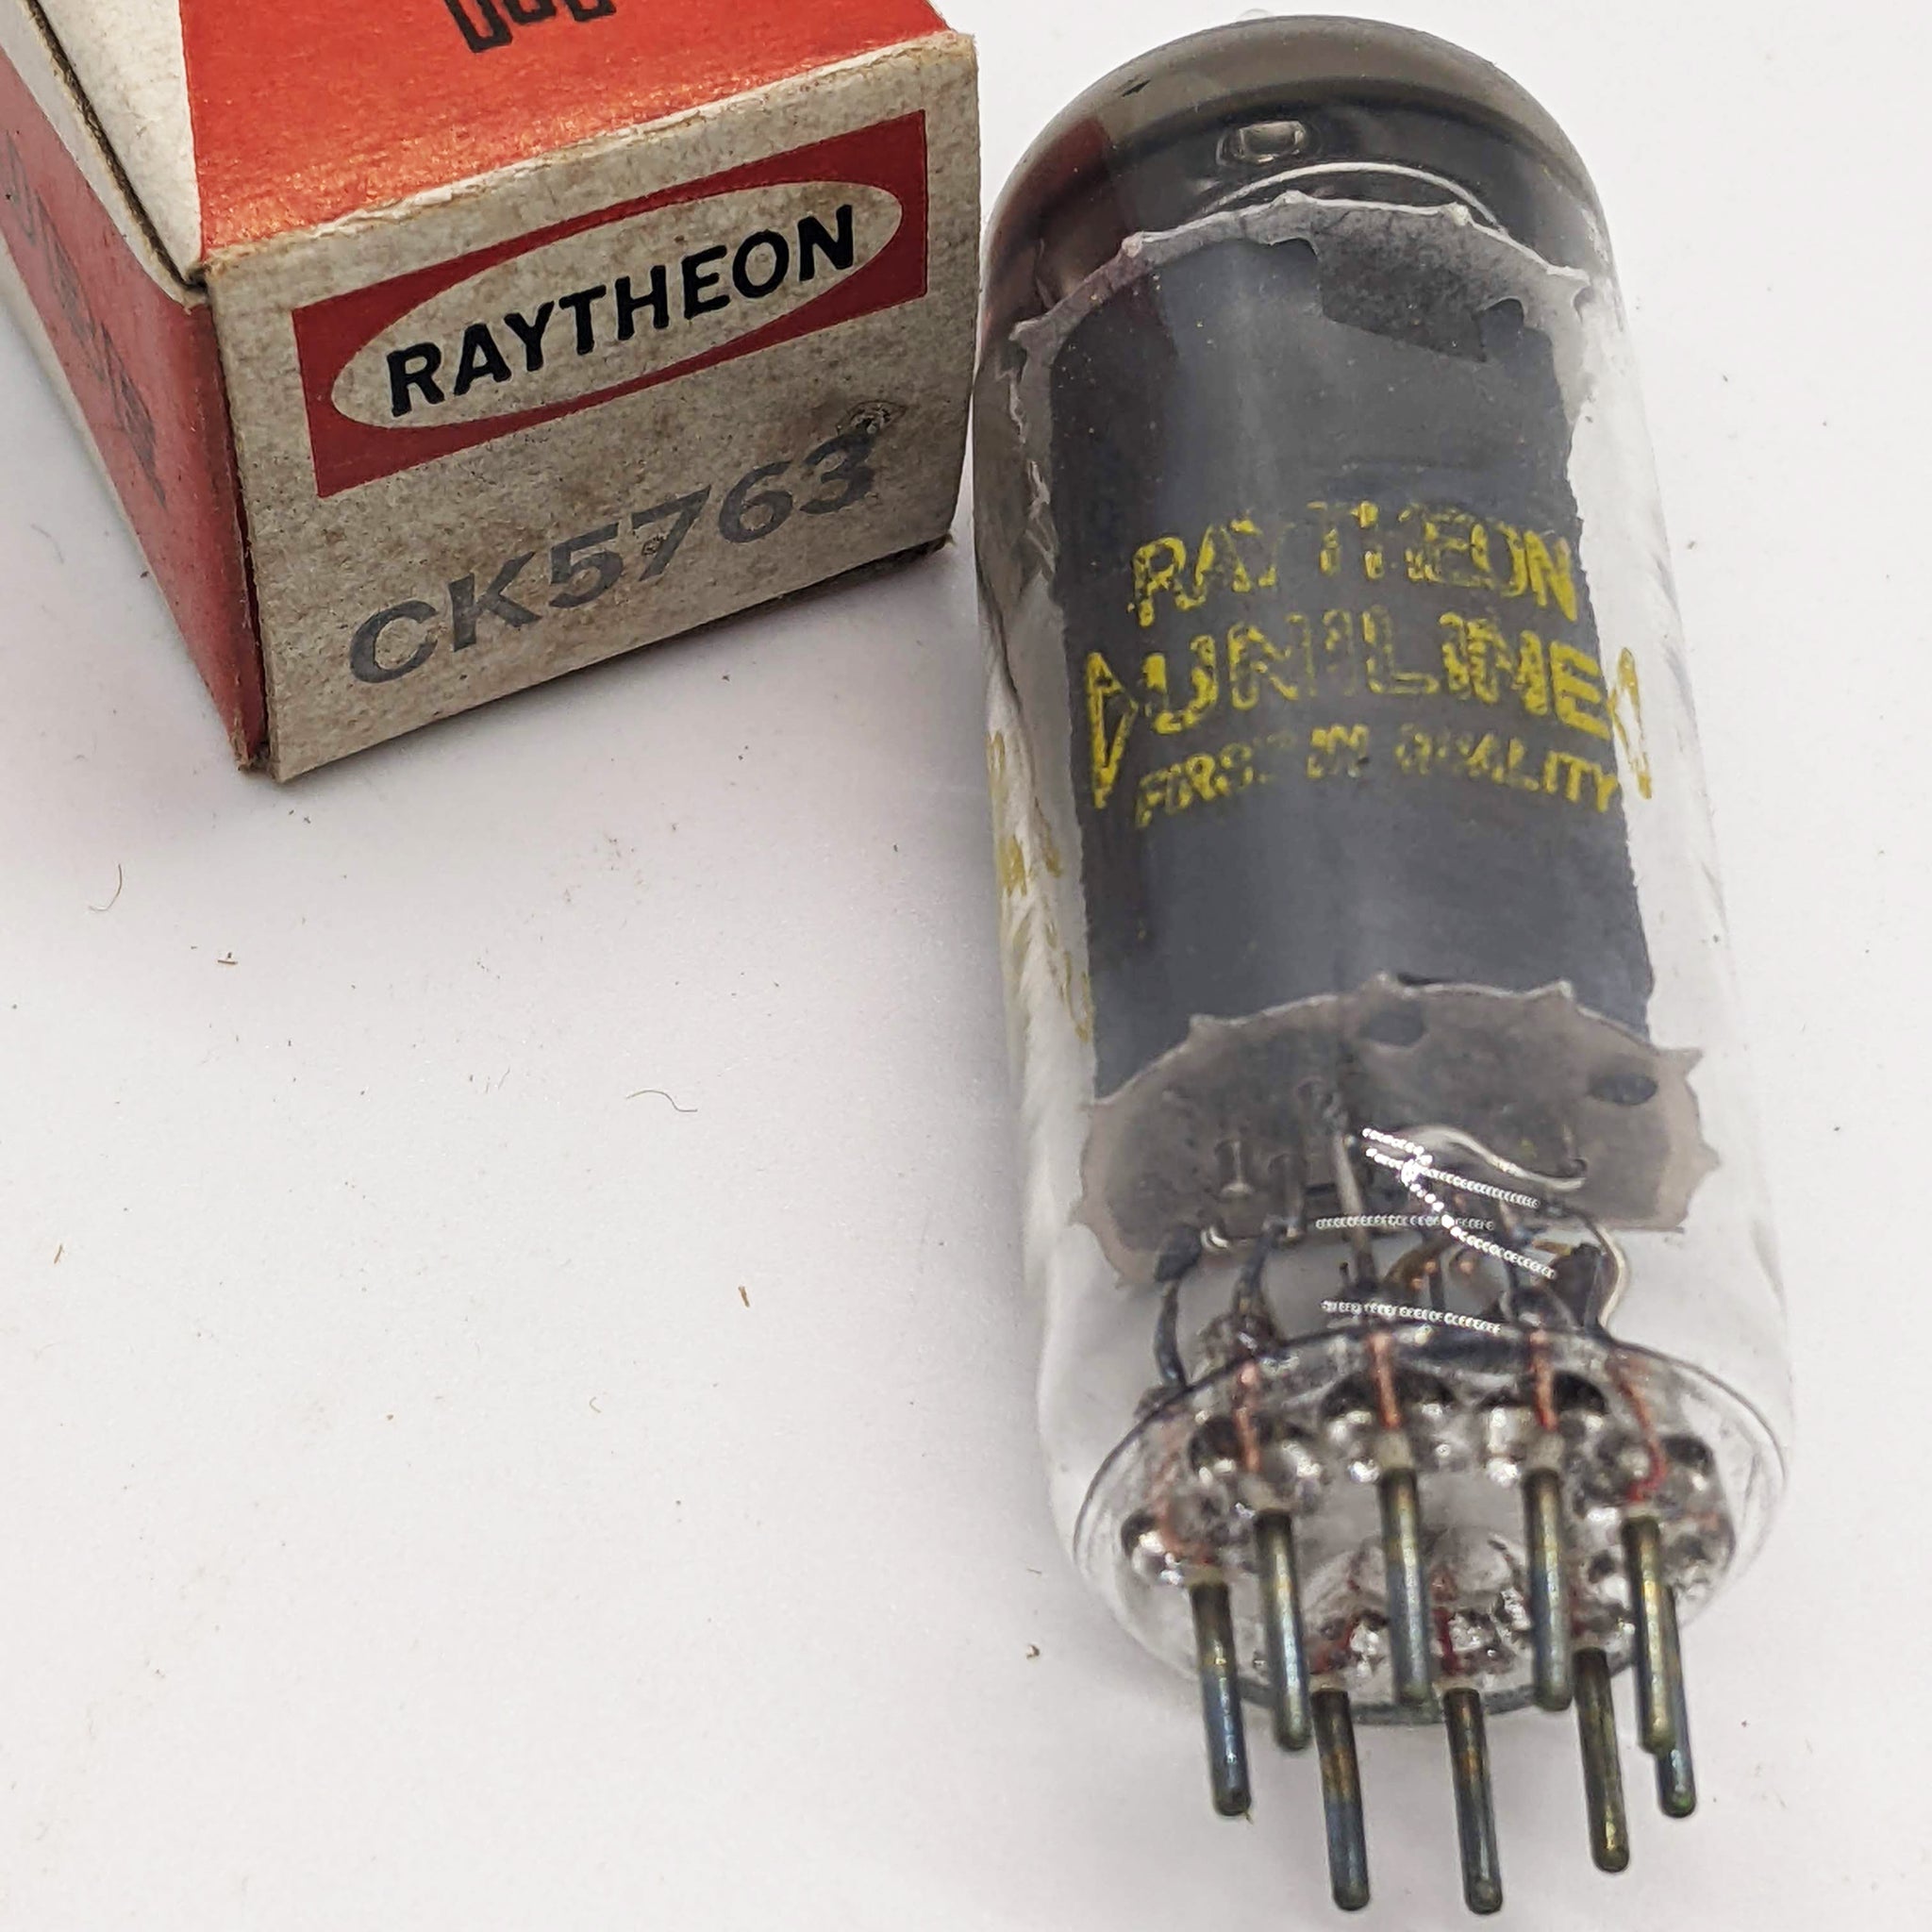 Raytheon CK5763 Tube, New,  Made in USA NOS